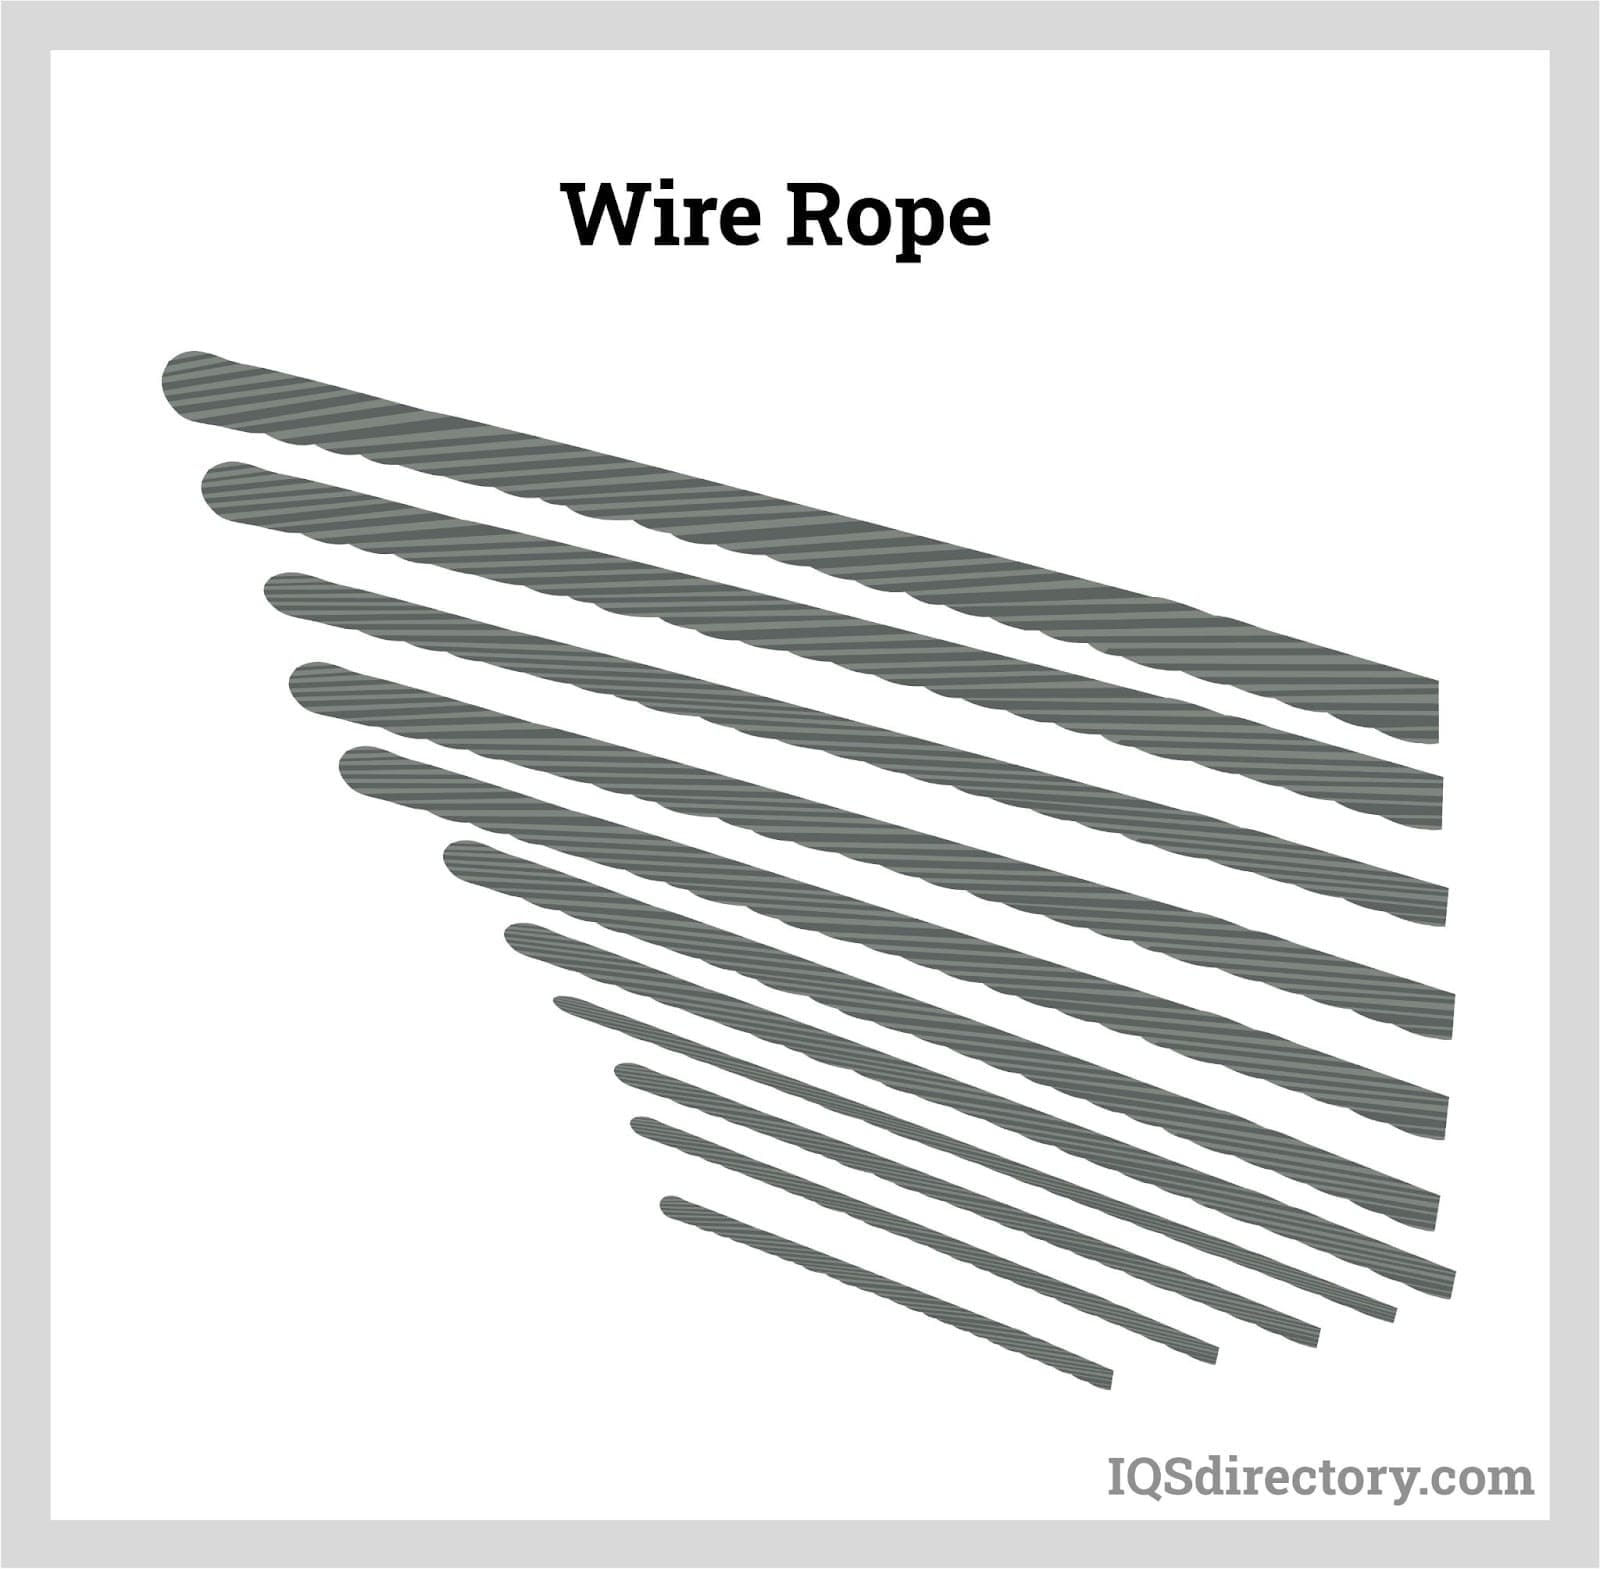 Unraveling the Meaning of A Live Wire 